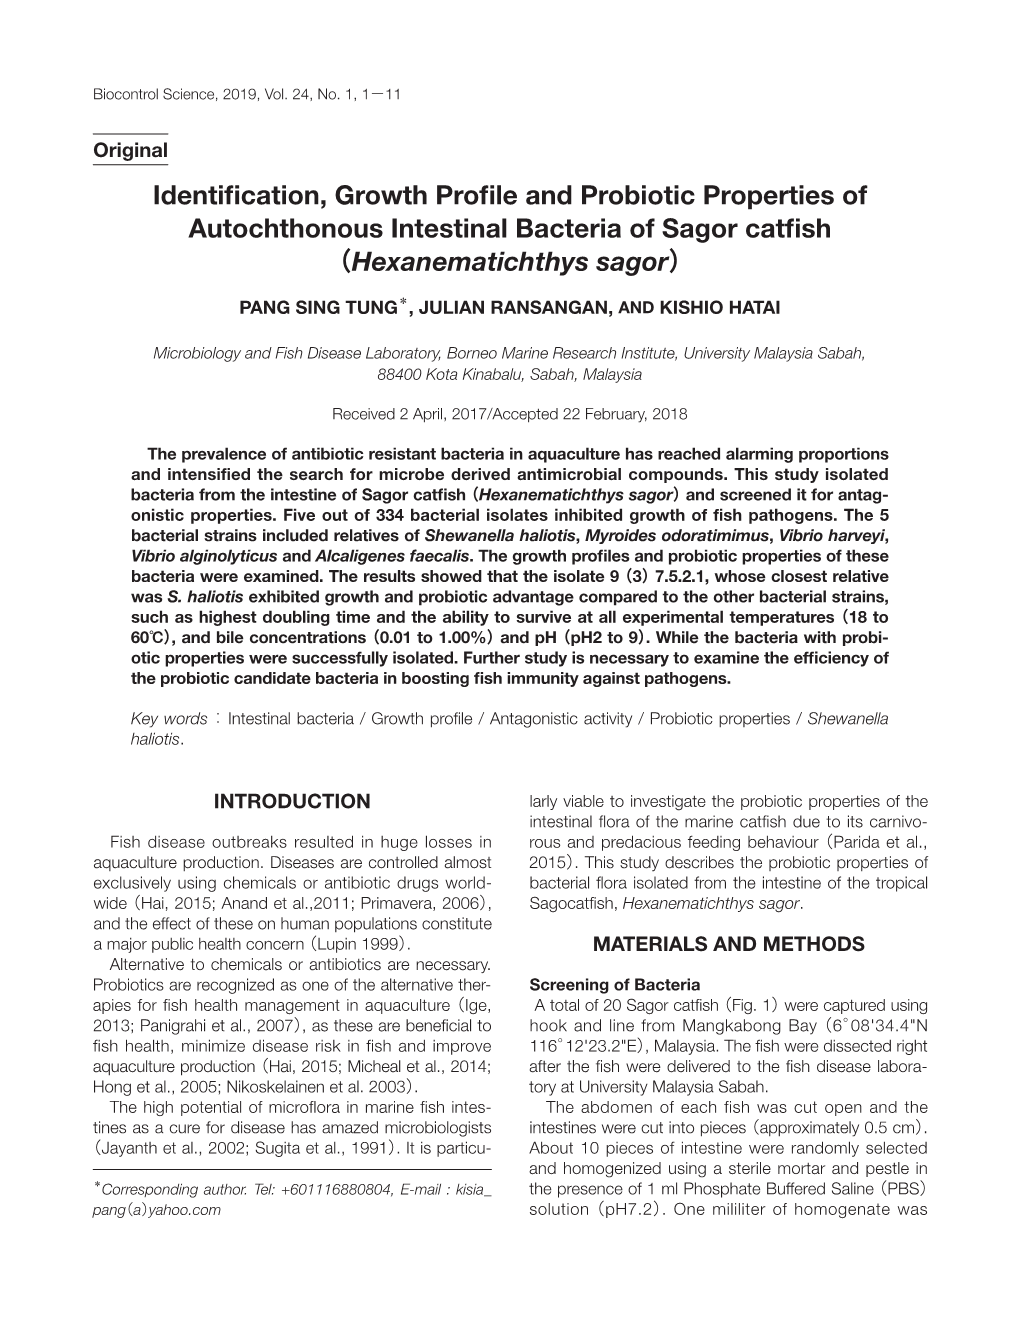 Identification, Growth Profile and Probiotic Properties Of